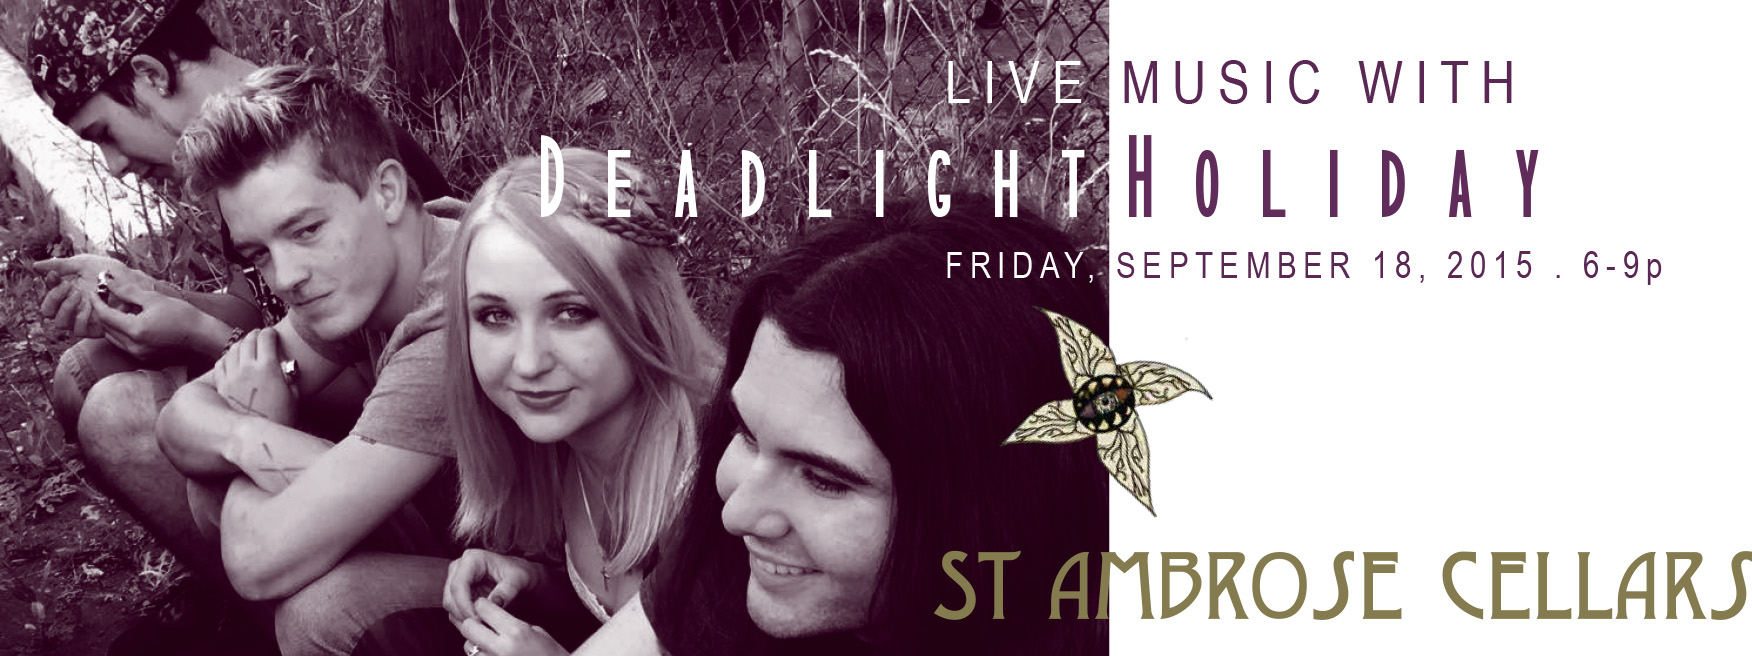 Deadlight Holiday - Live Music at St. Ambrose